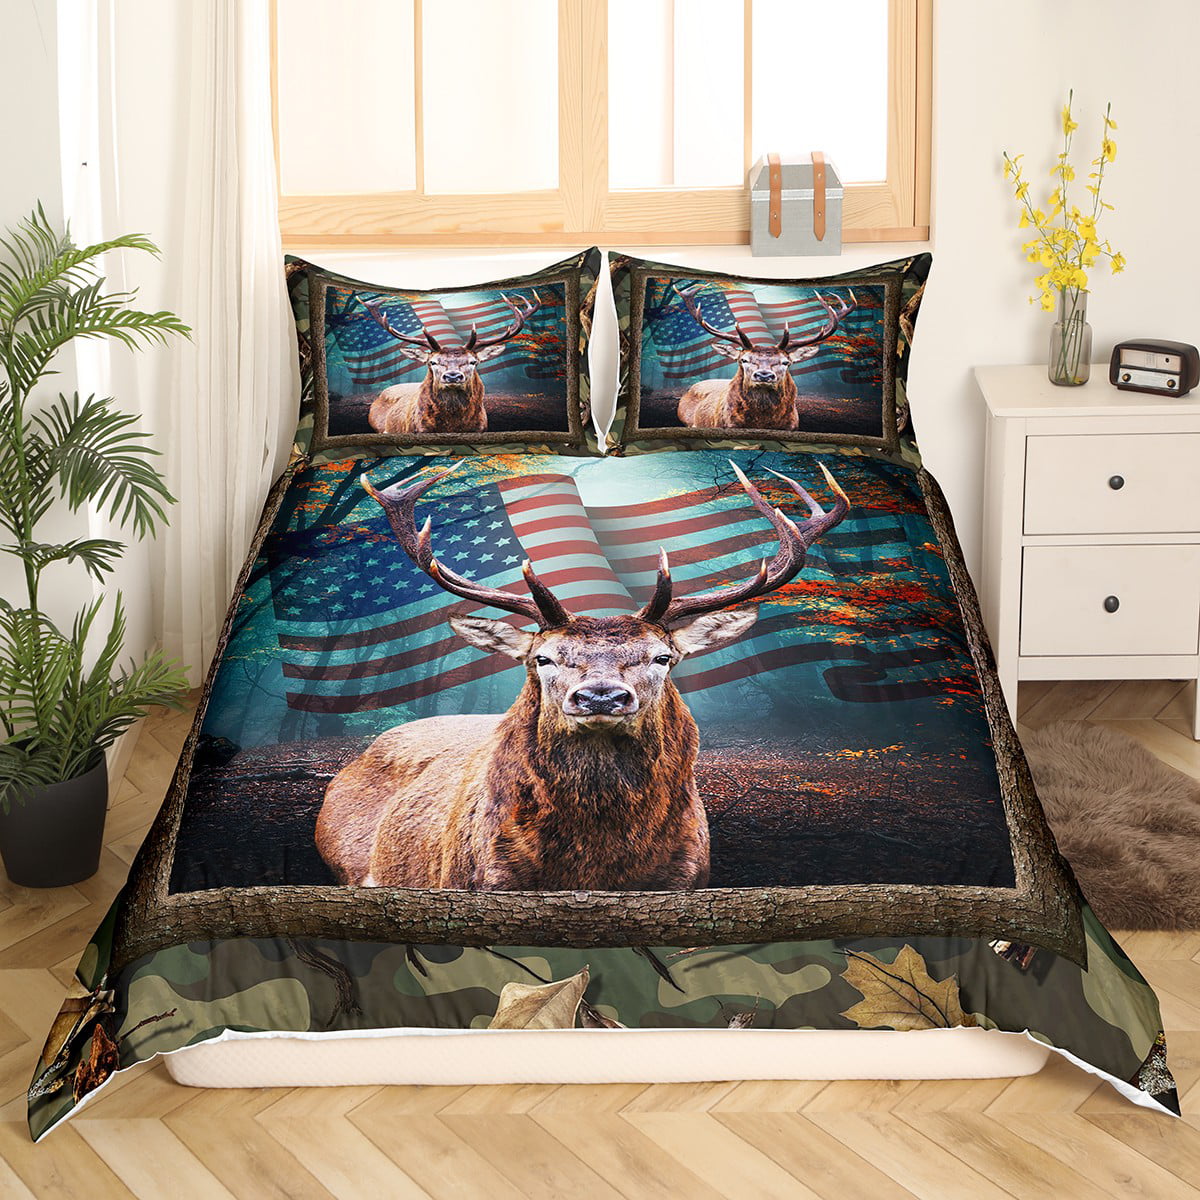 Rustic Deer Duvet Cover Full,Hunting Animal Deer Antlers Sketch Bedding Set  for Kids Boys Girls,Army Camo Art Comforter Cover,Farmhouse Natural  Wildlife Bed Sets with 2 Pillowcases Bedroom Decor 